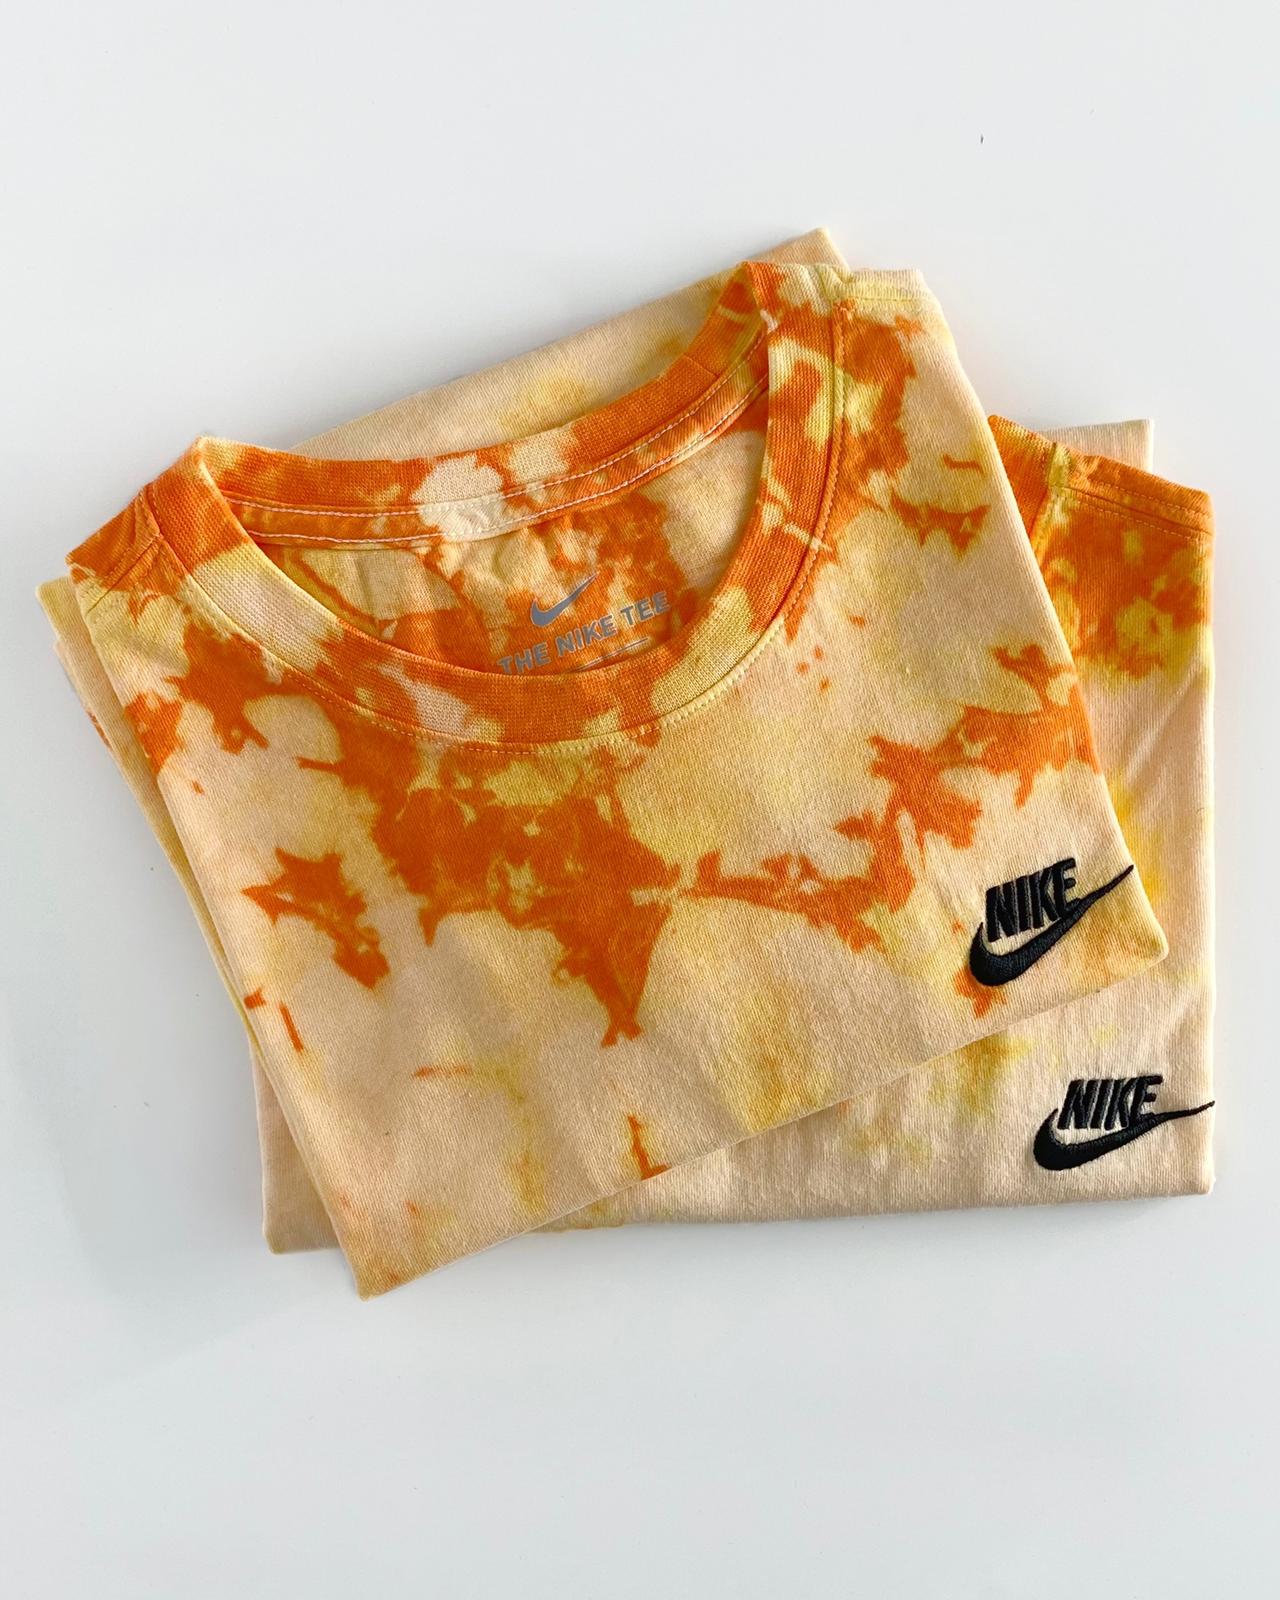 Fanta mix colors tie dye adds a pop of color to this authentic Nike tee.